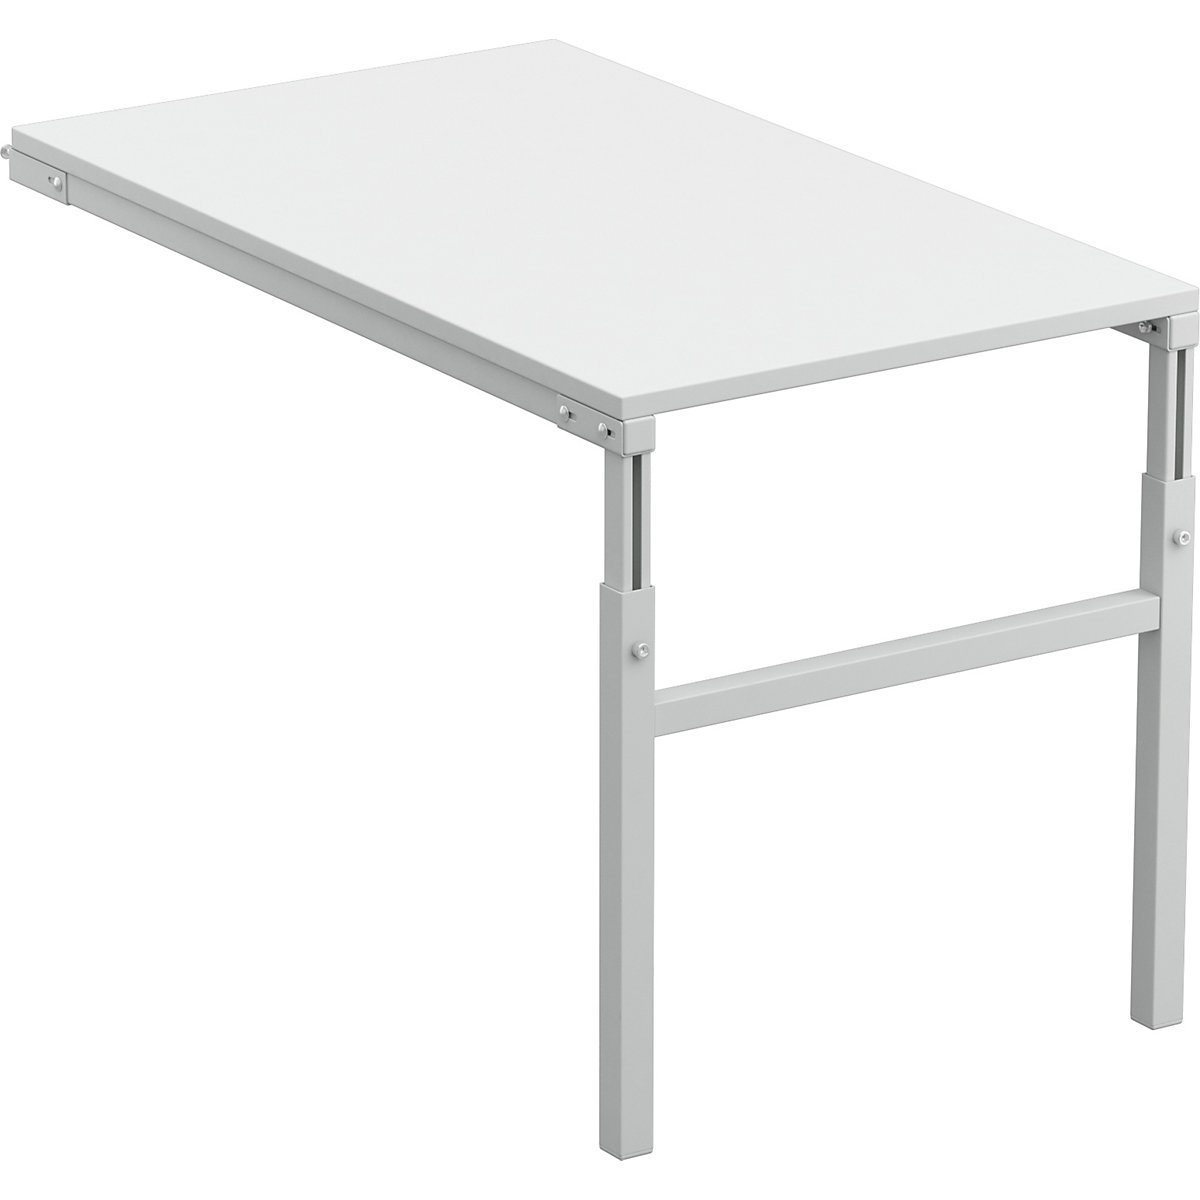 ESD angled extension table - Treston